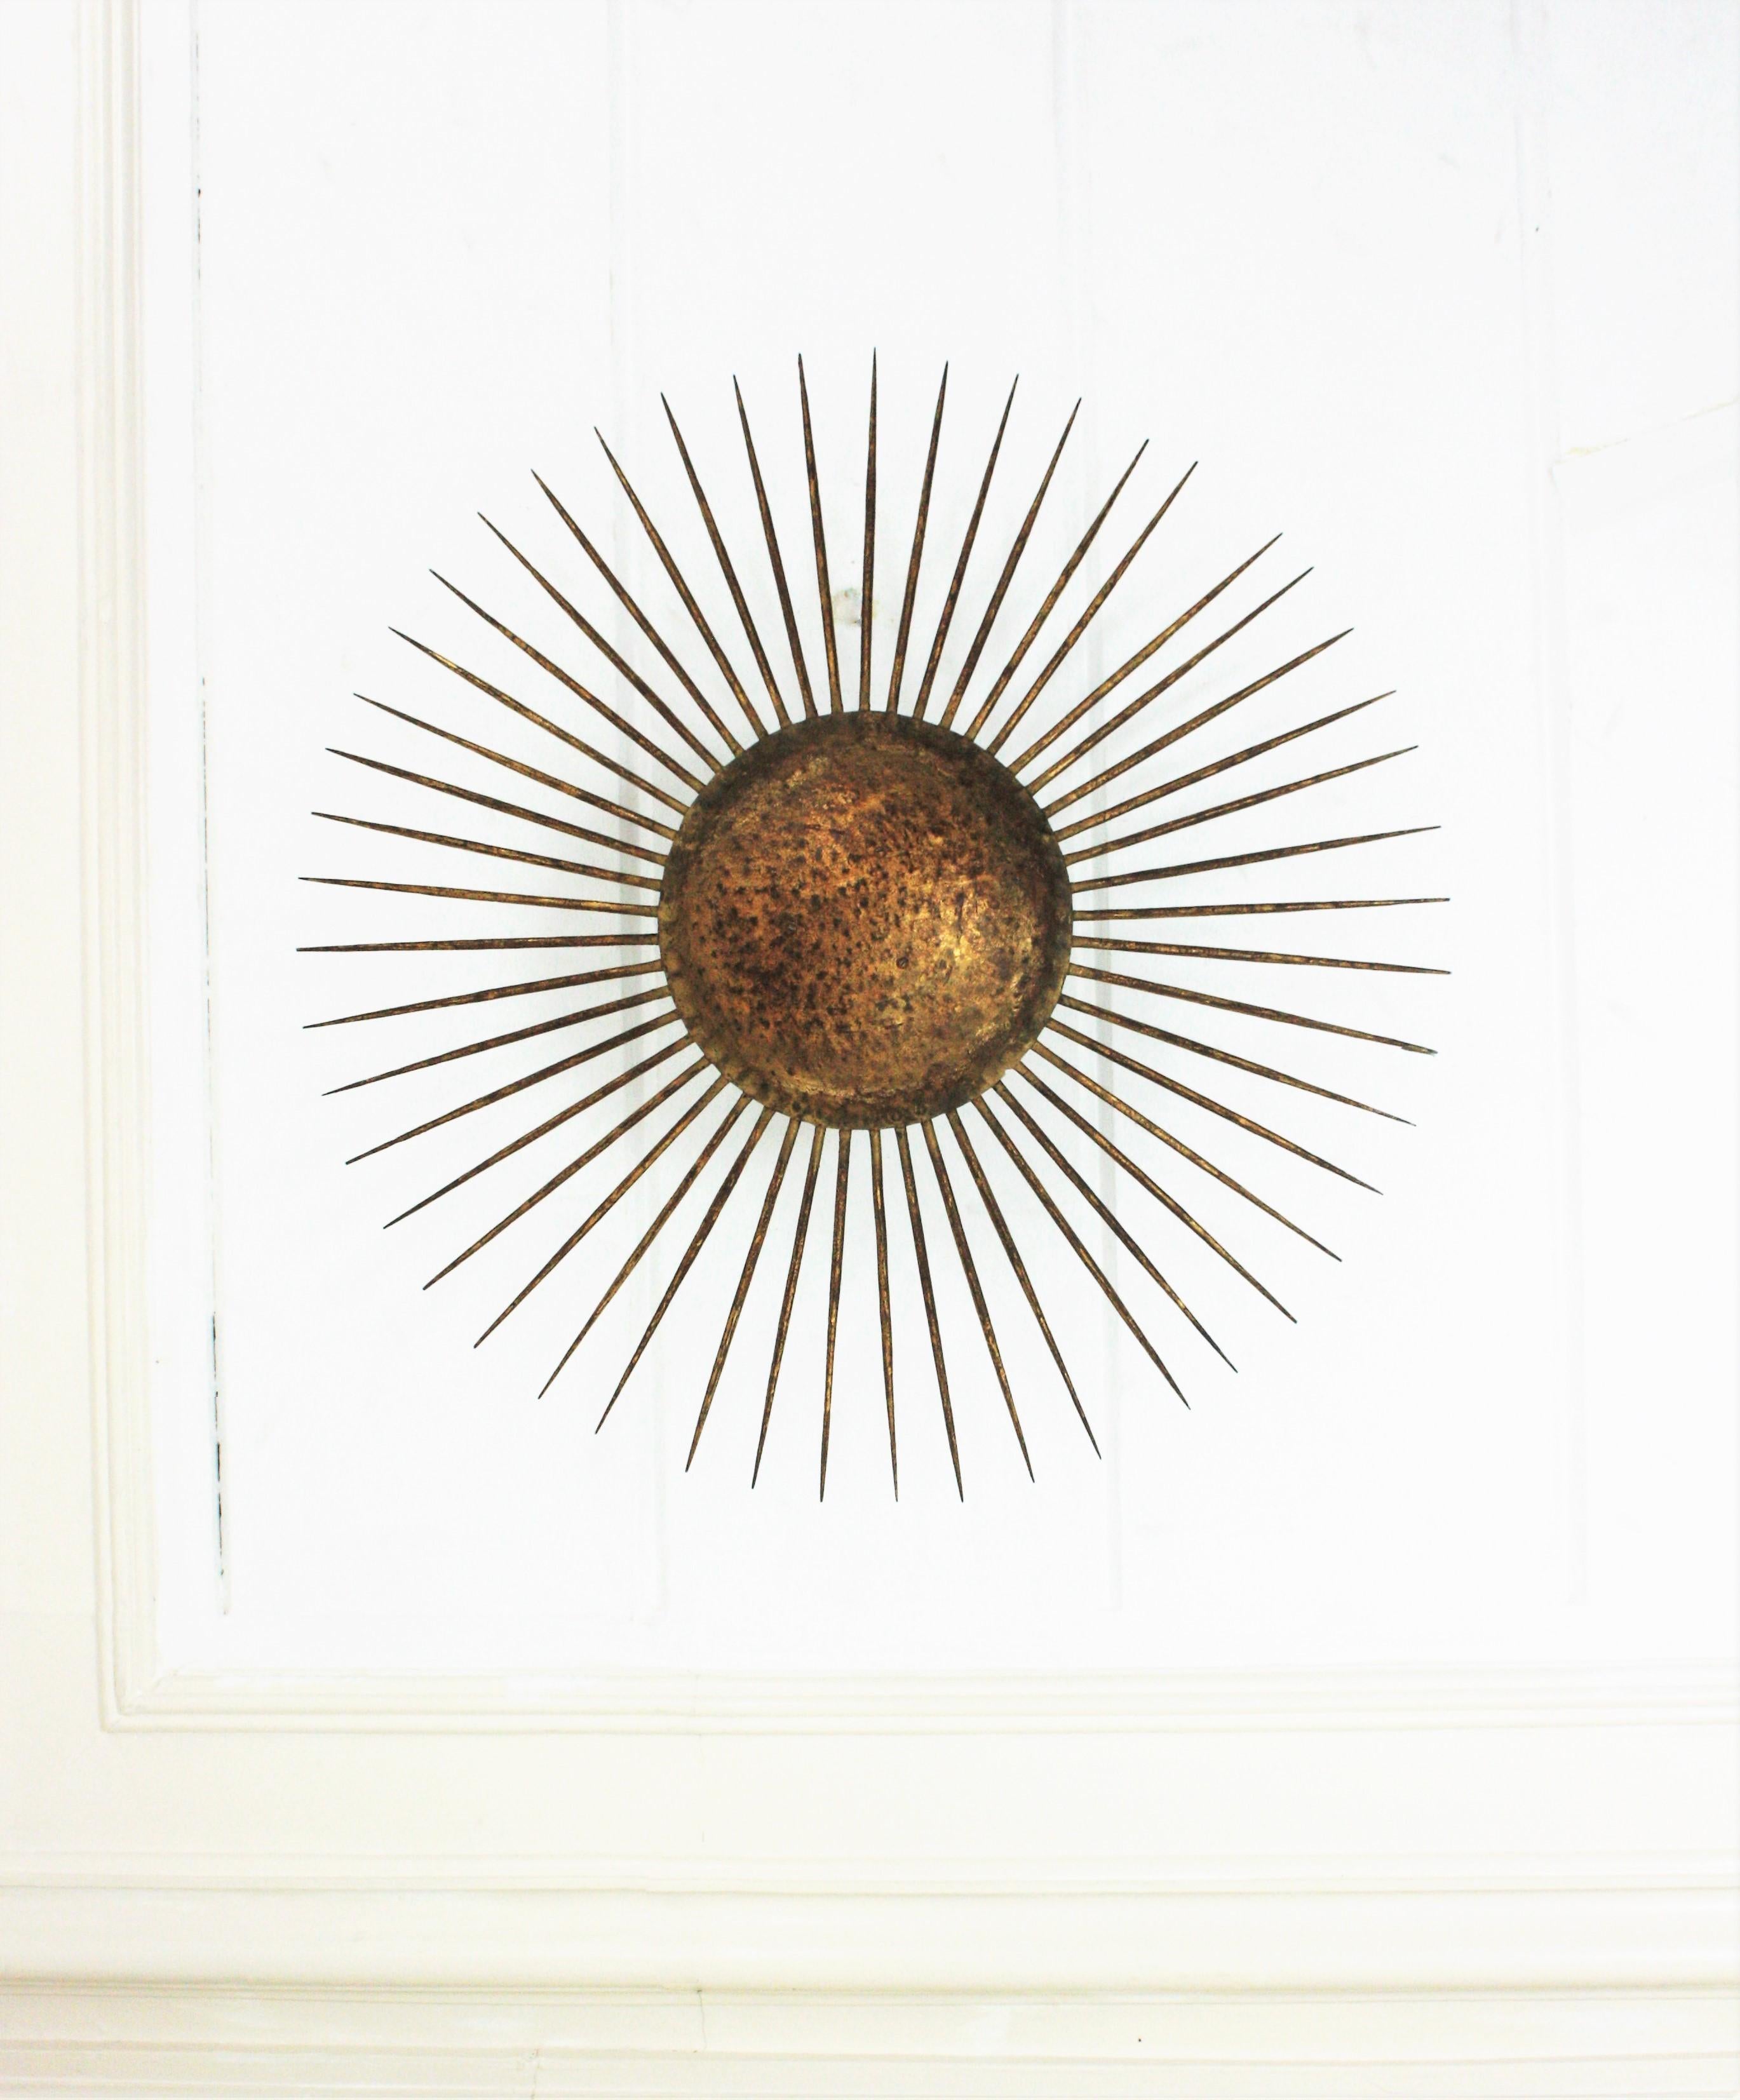 French Sunburst Ceiling Light Fixture in Gilt Wrought Iron, 1940s For Sale 2